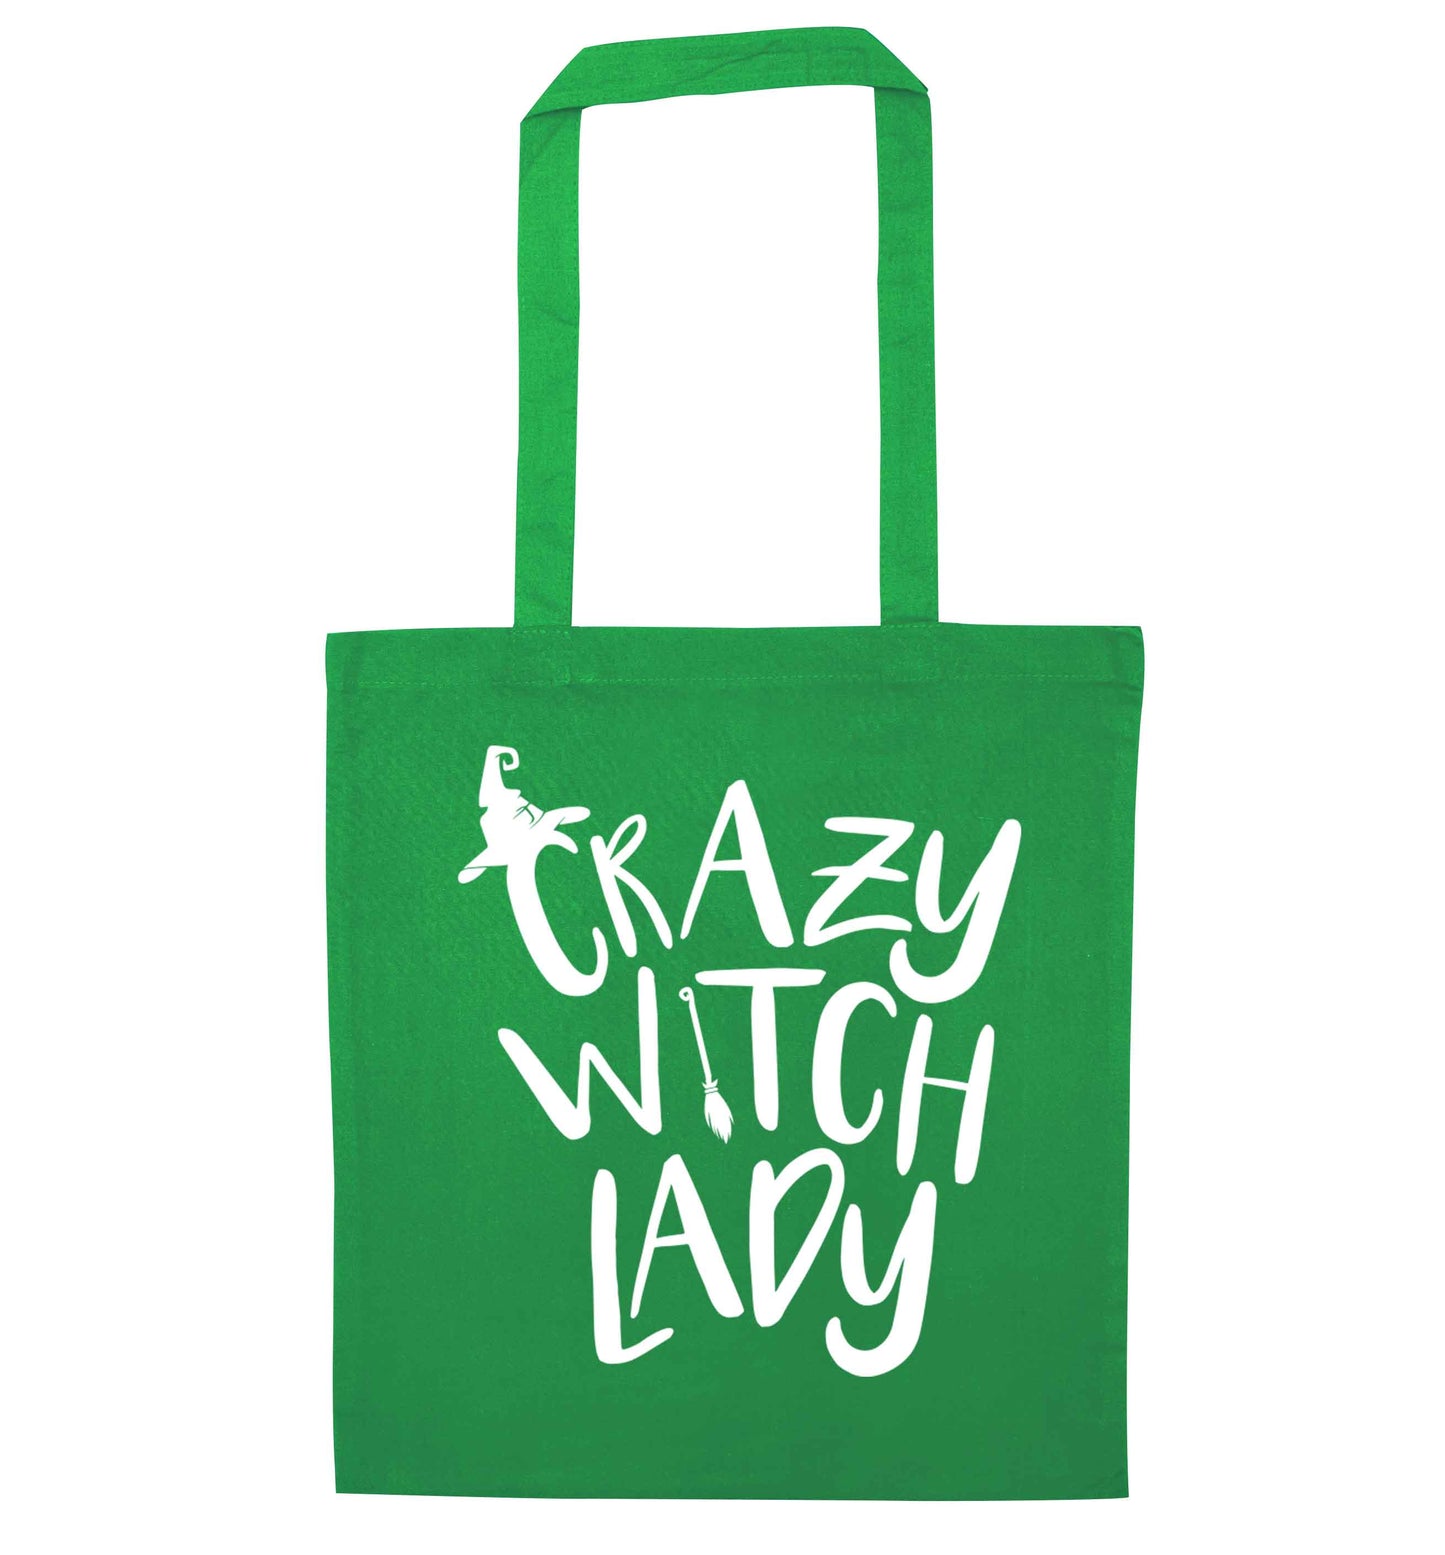 Crazy witch lady green tote bag